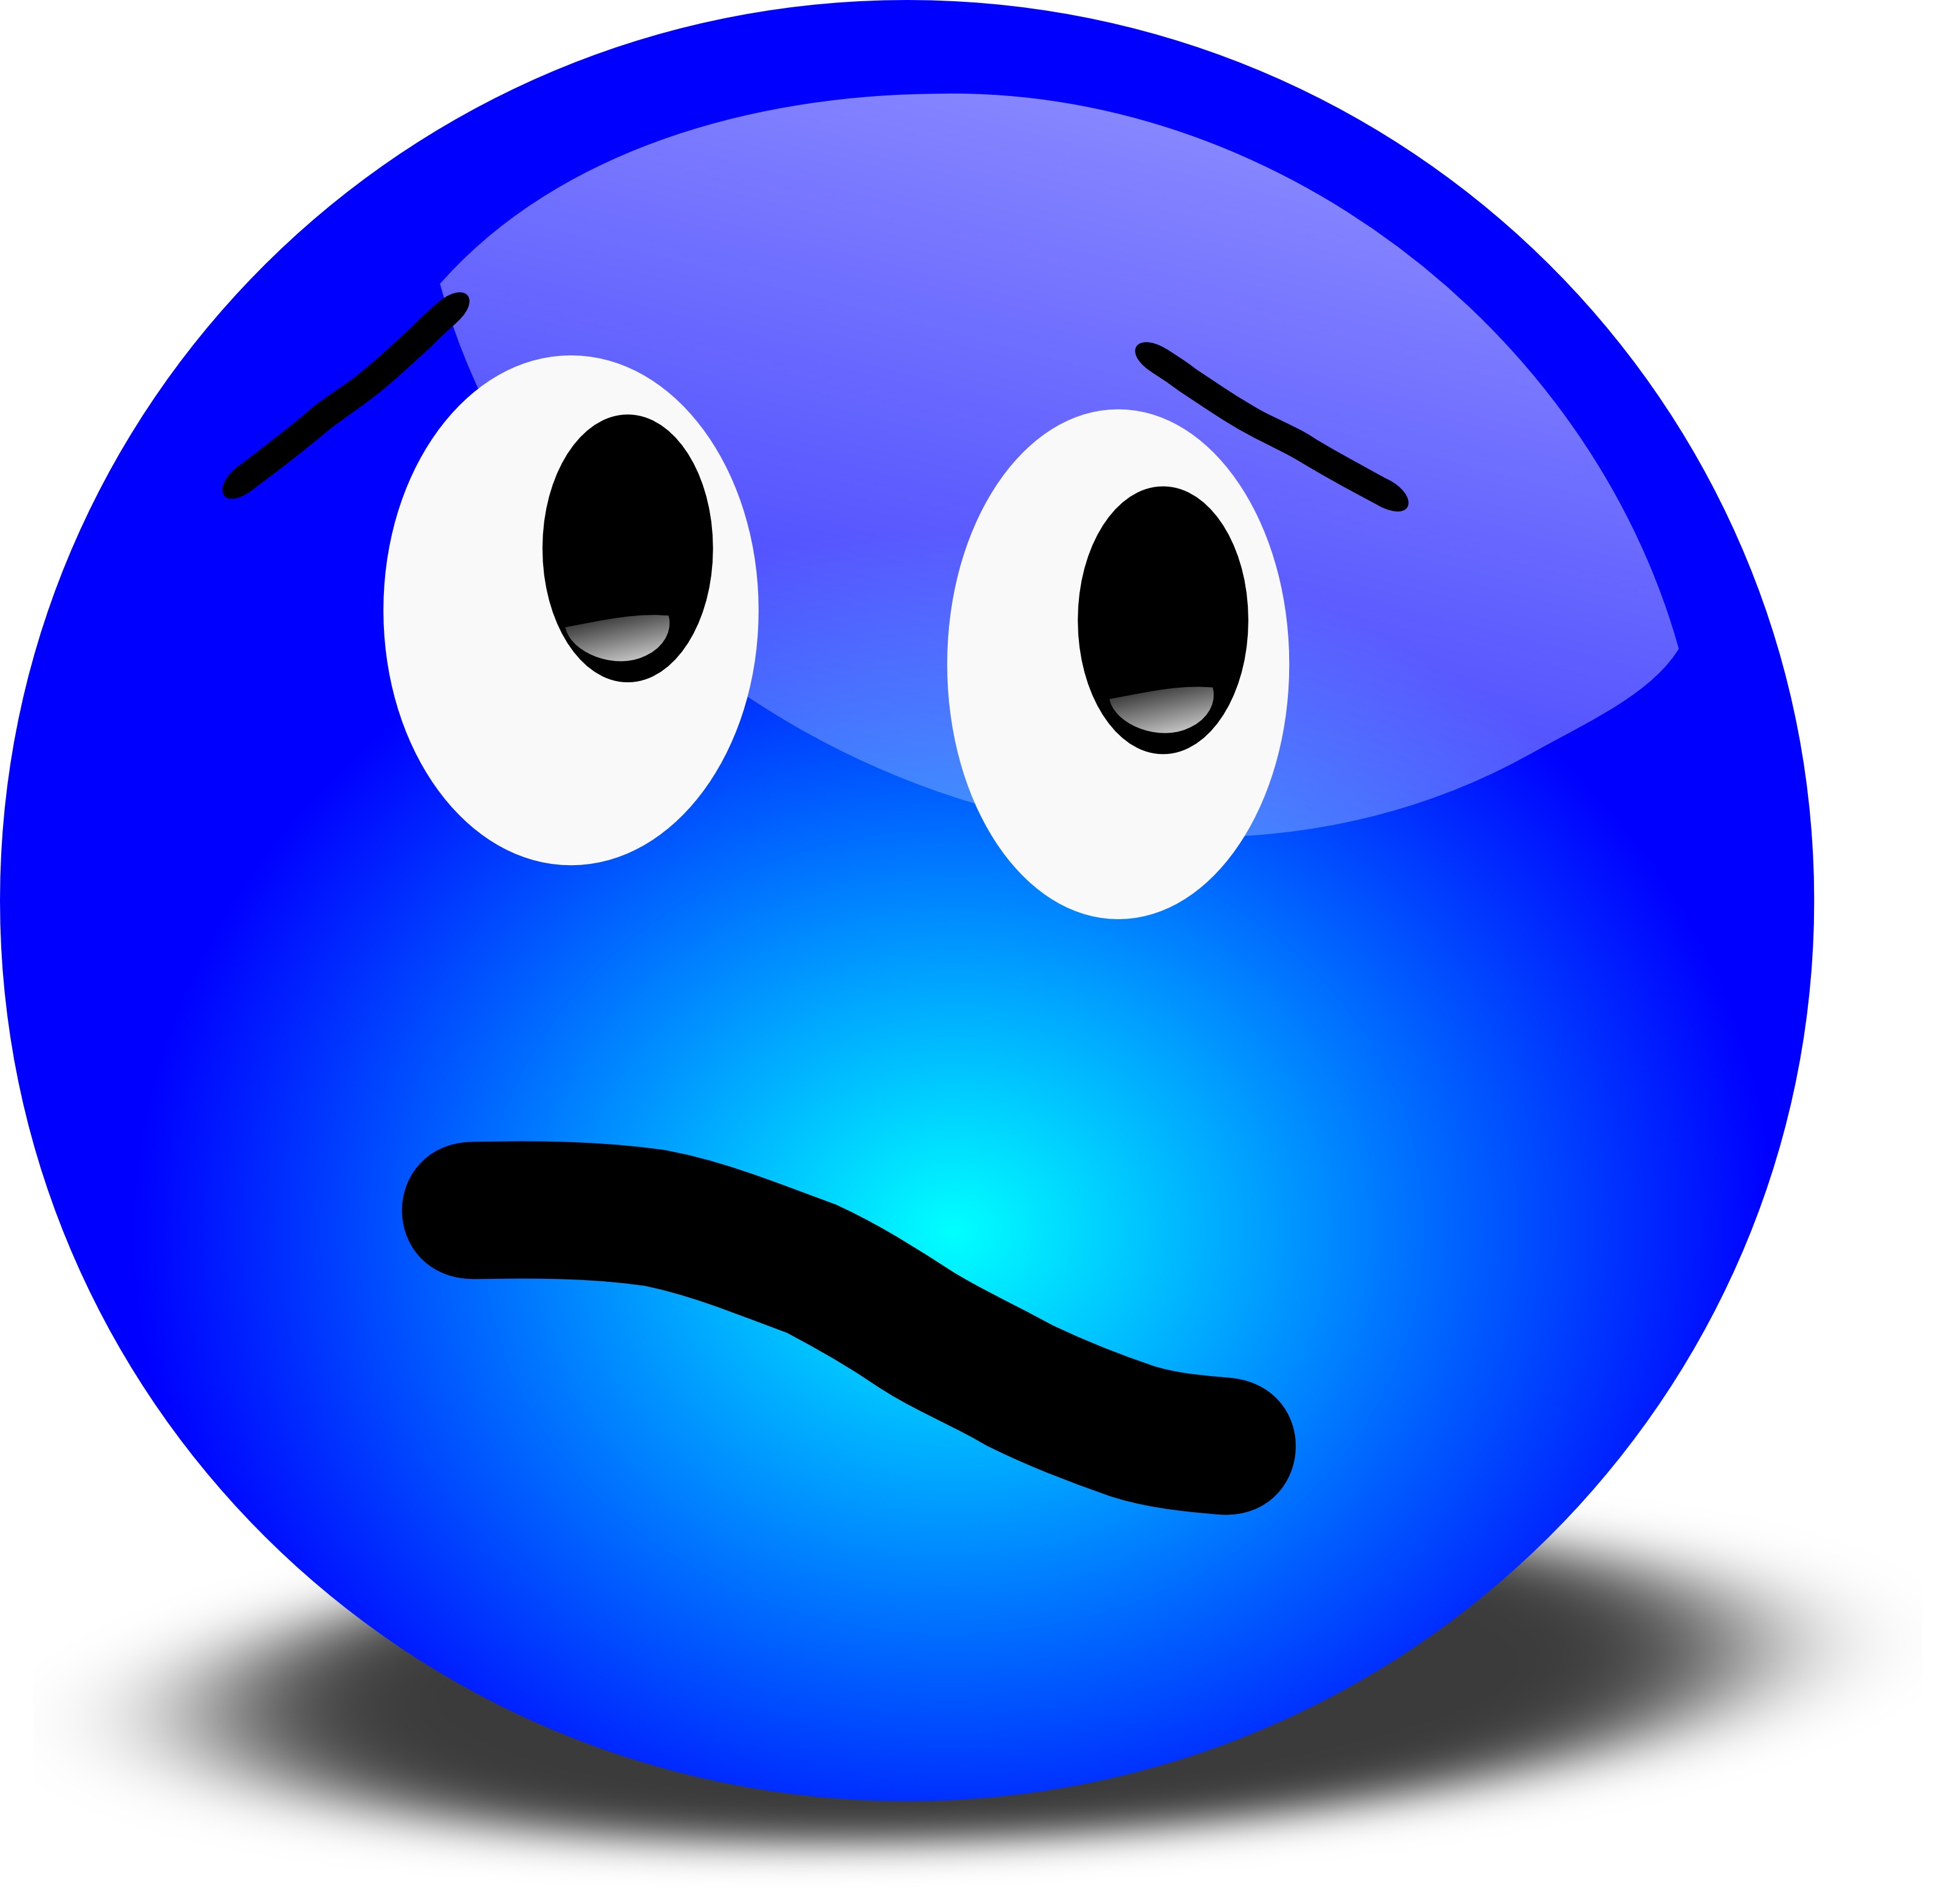 Free Pictures Of A Sad Face, Download Free Clip Art, Free Clip Art - Free Printable Sad Faces